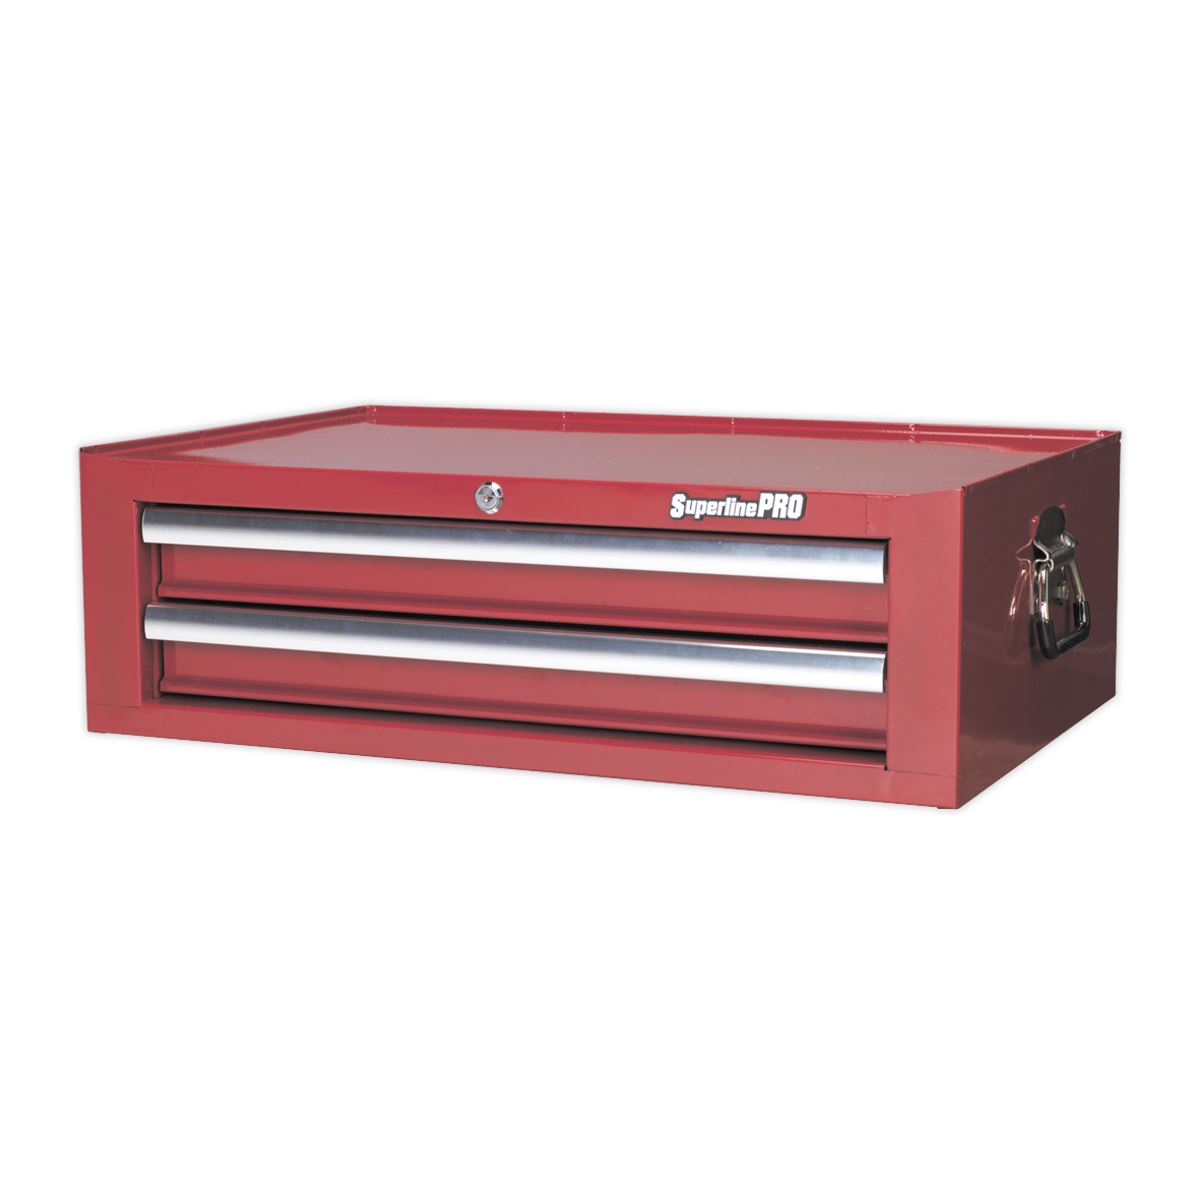 Sealey Superline Pro Mid-Box 2 Drawer Tool Chest with Ball-Bearing Slides - Red